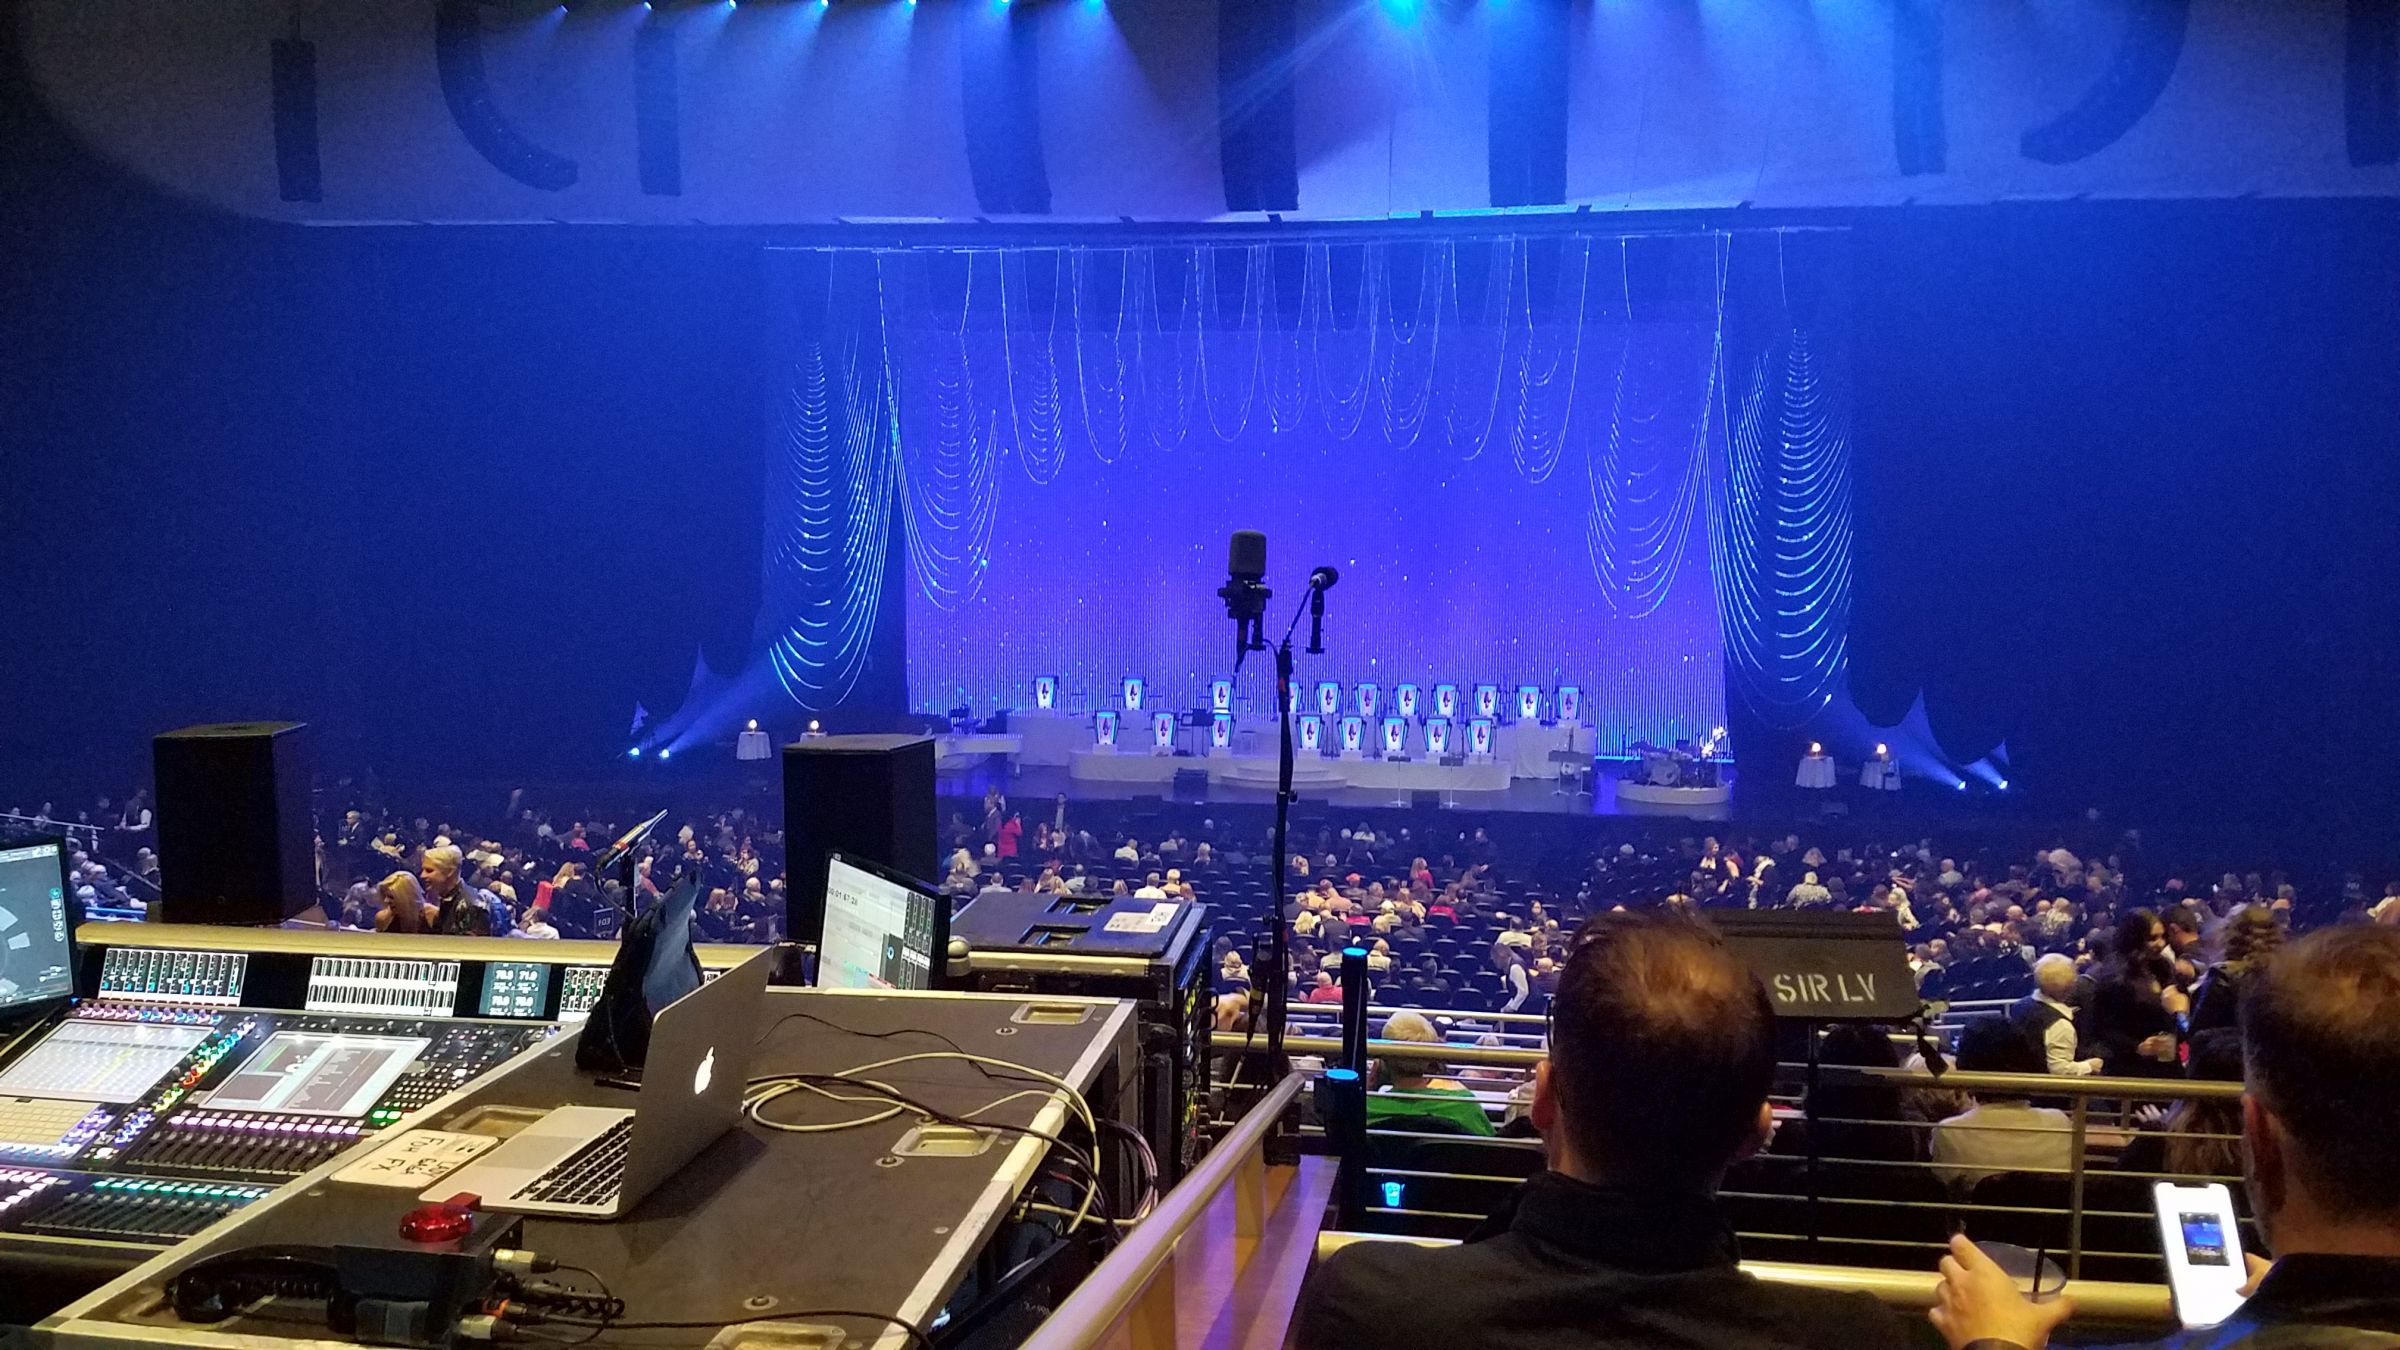 section 304, row l seat view  - dolby live at park mgm